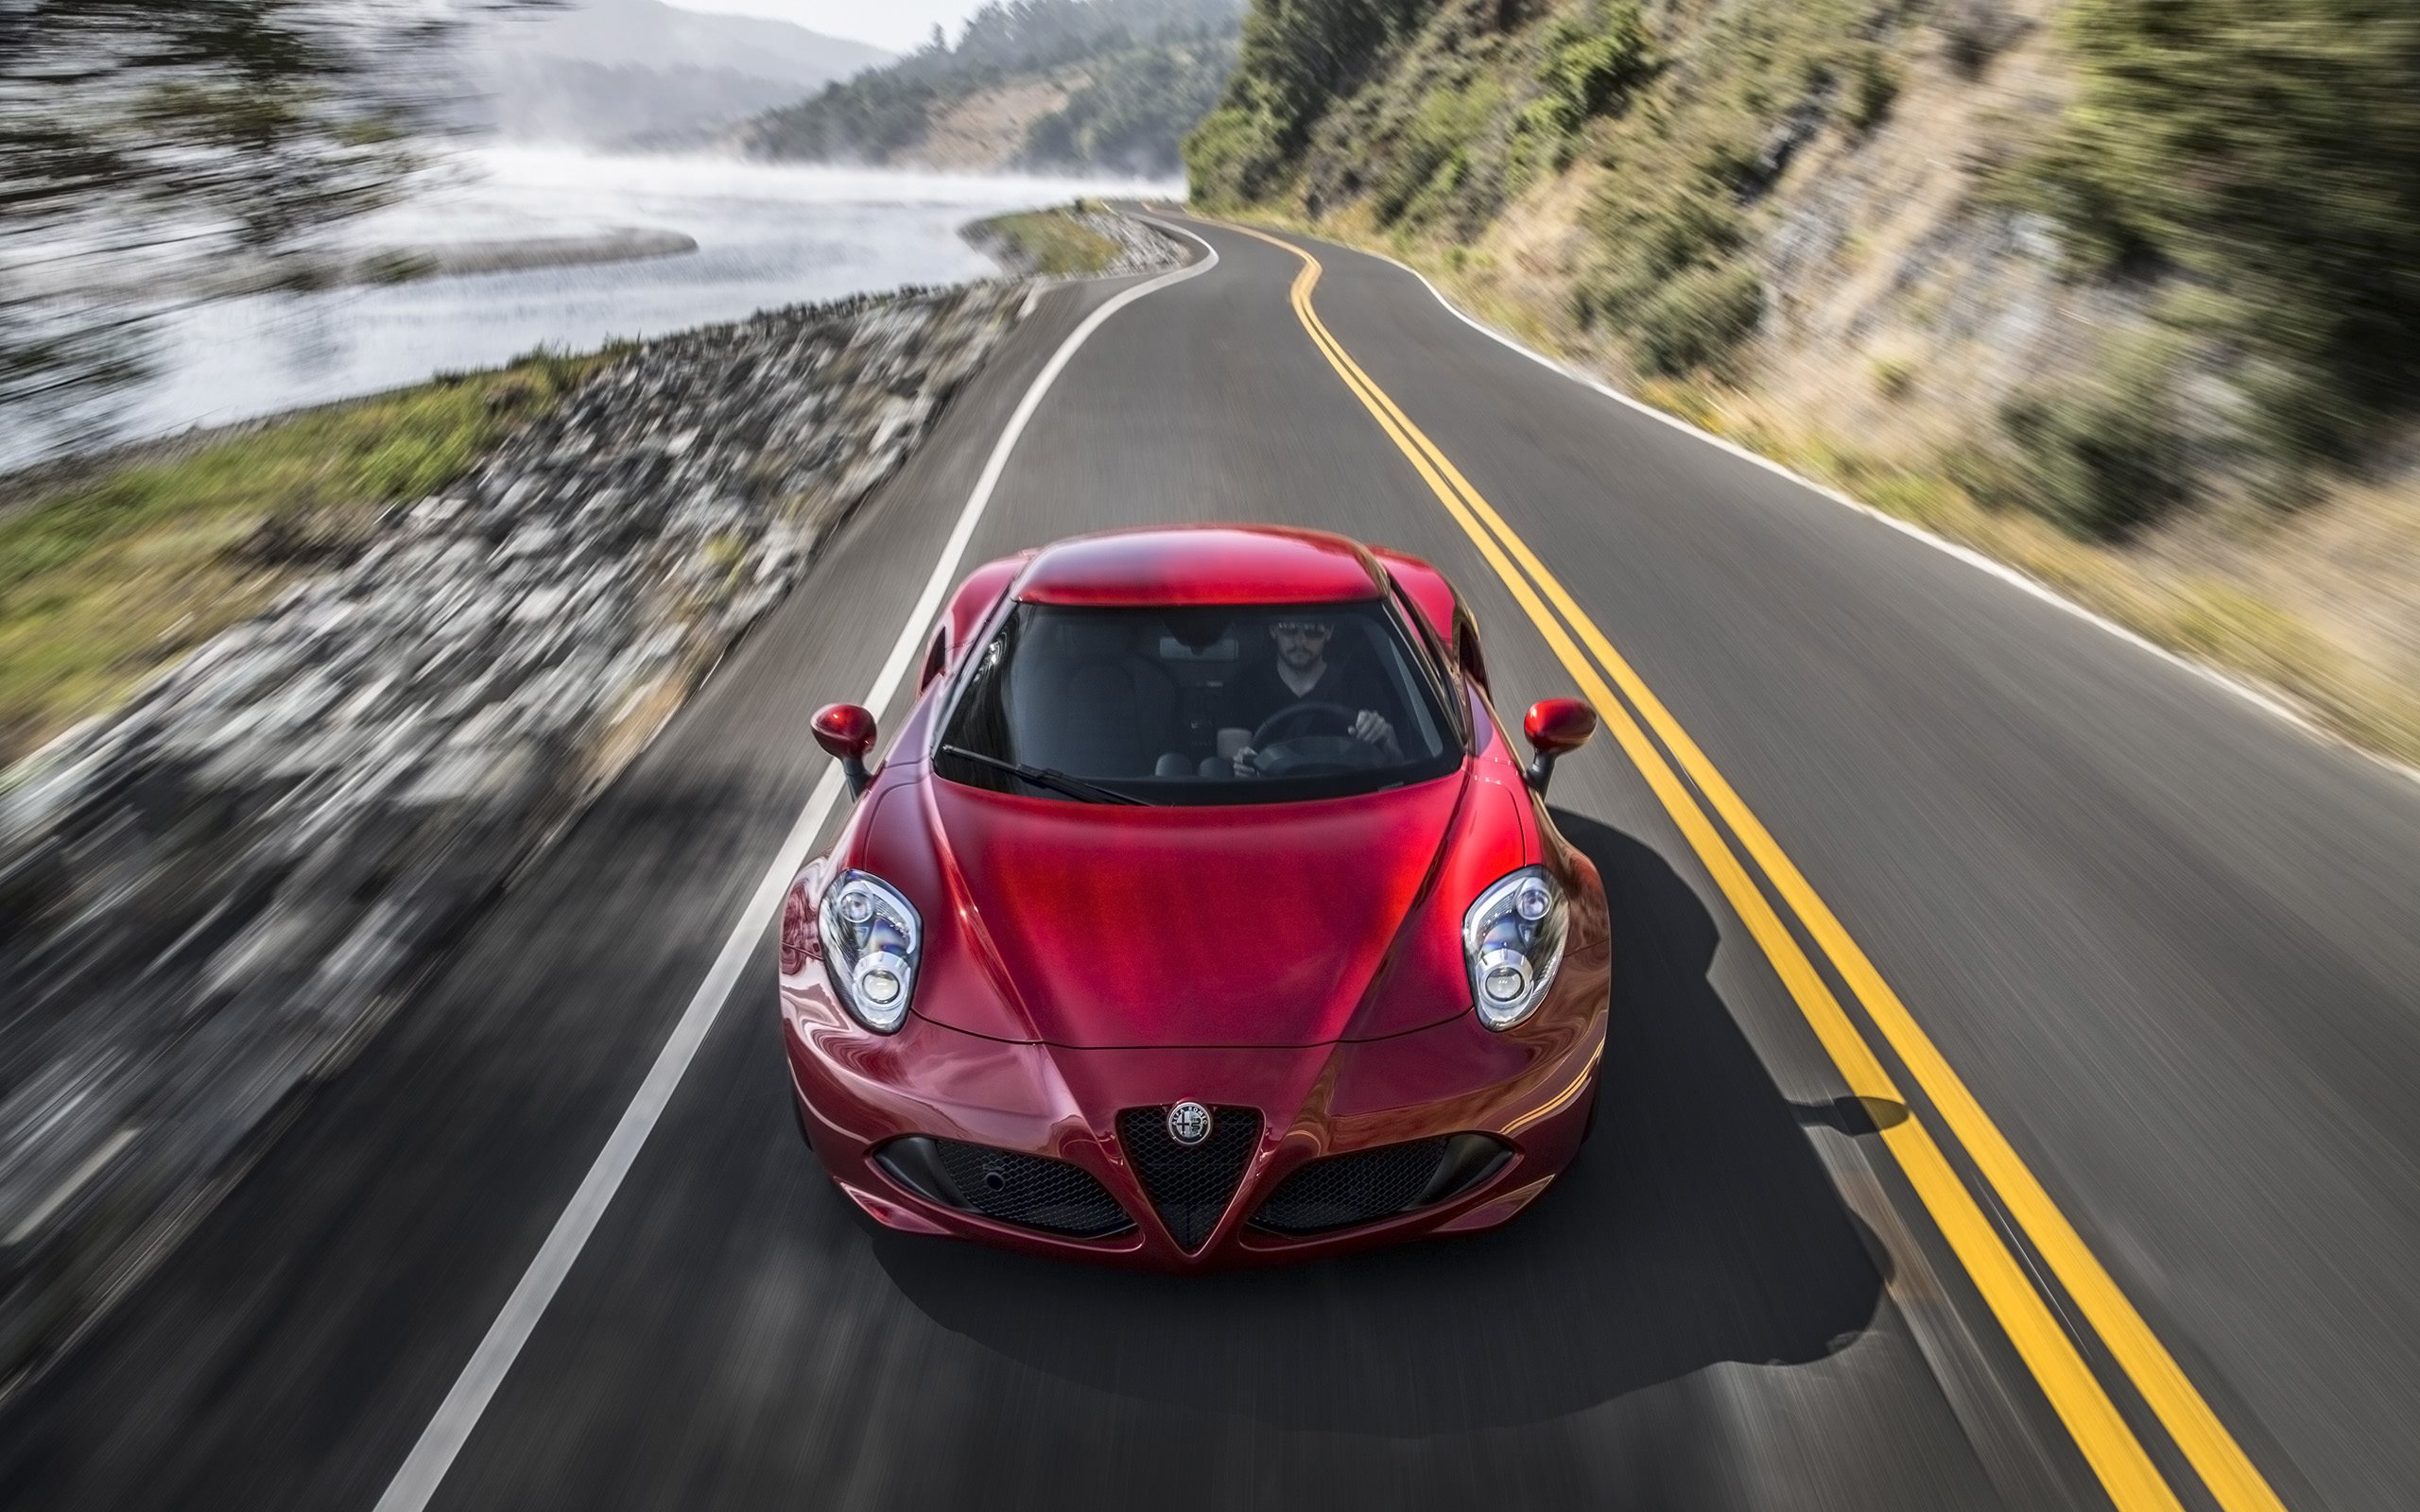 Alfa romeo 4c in red goes down the road at high speed